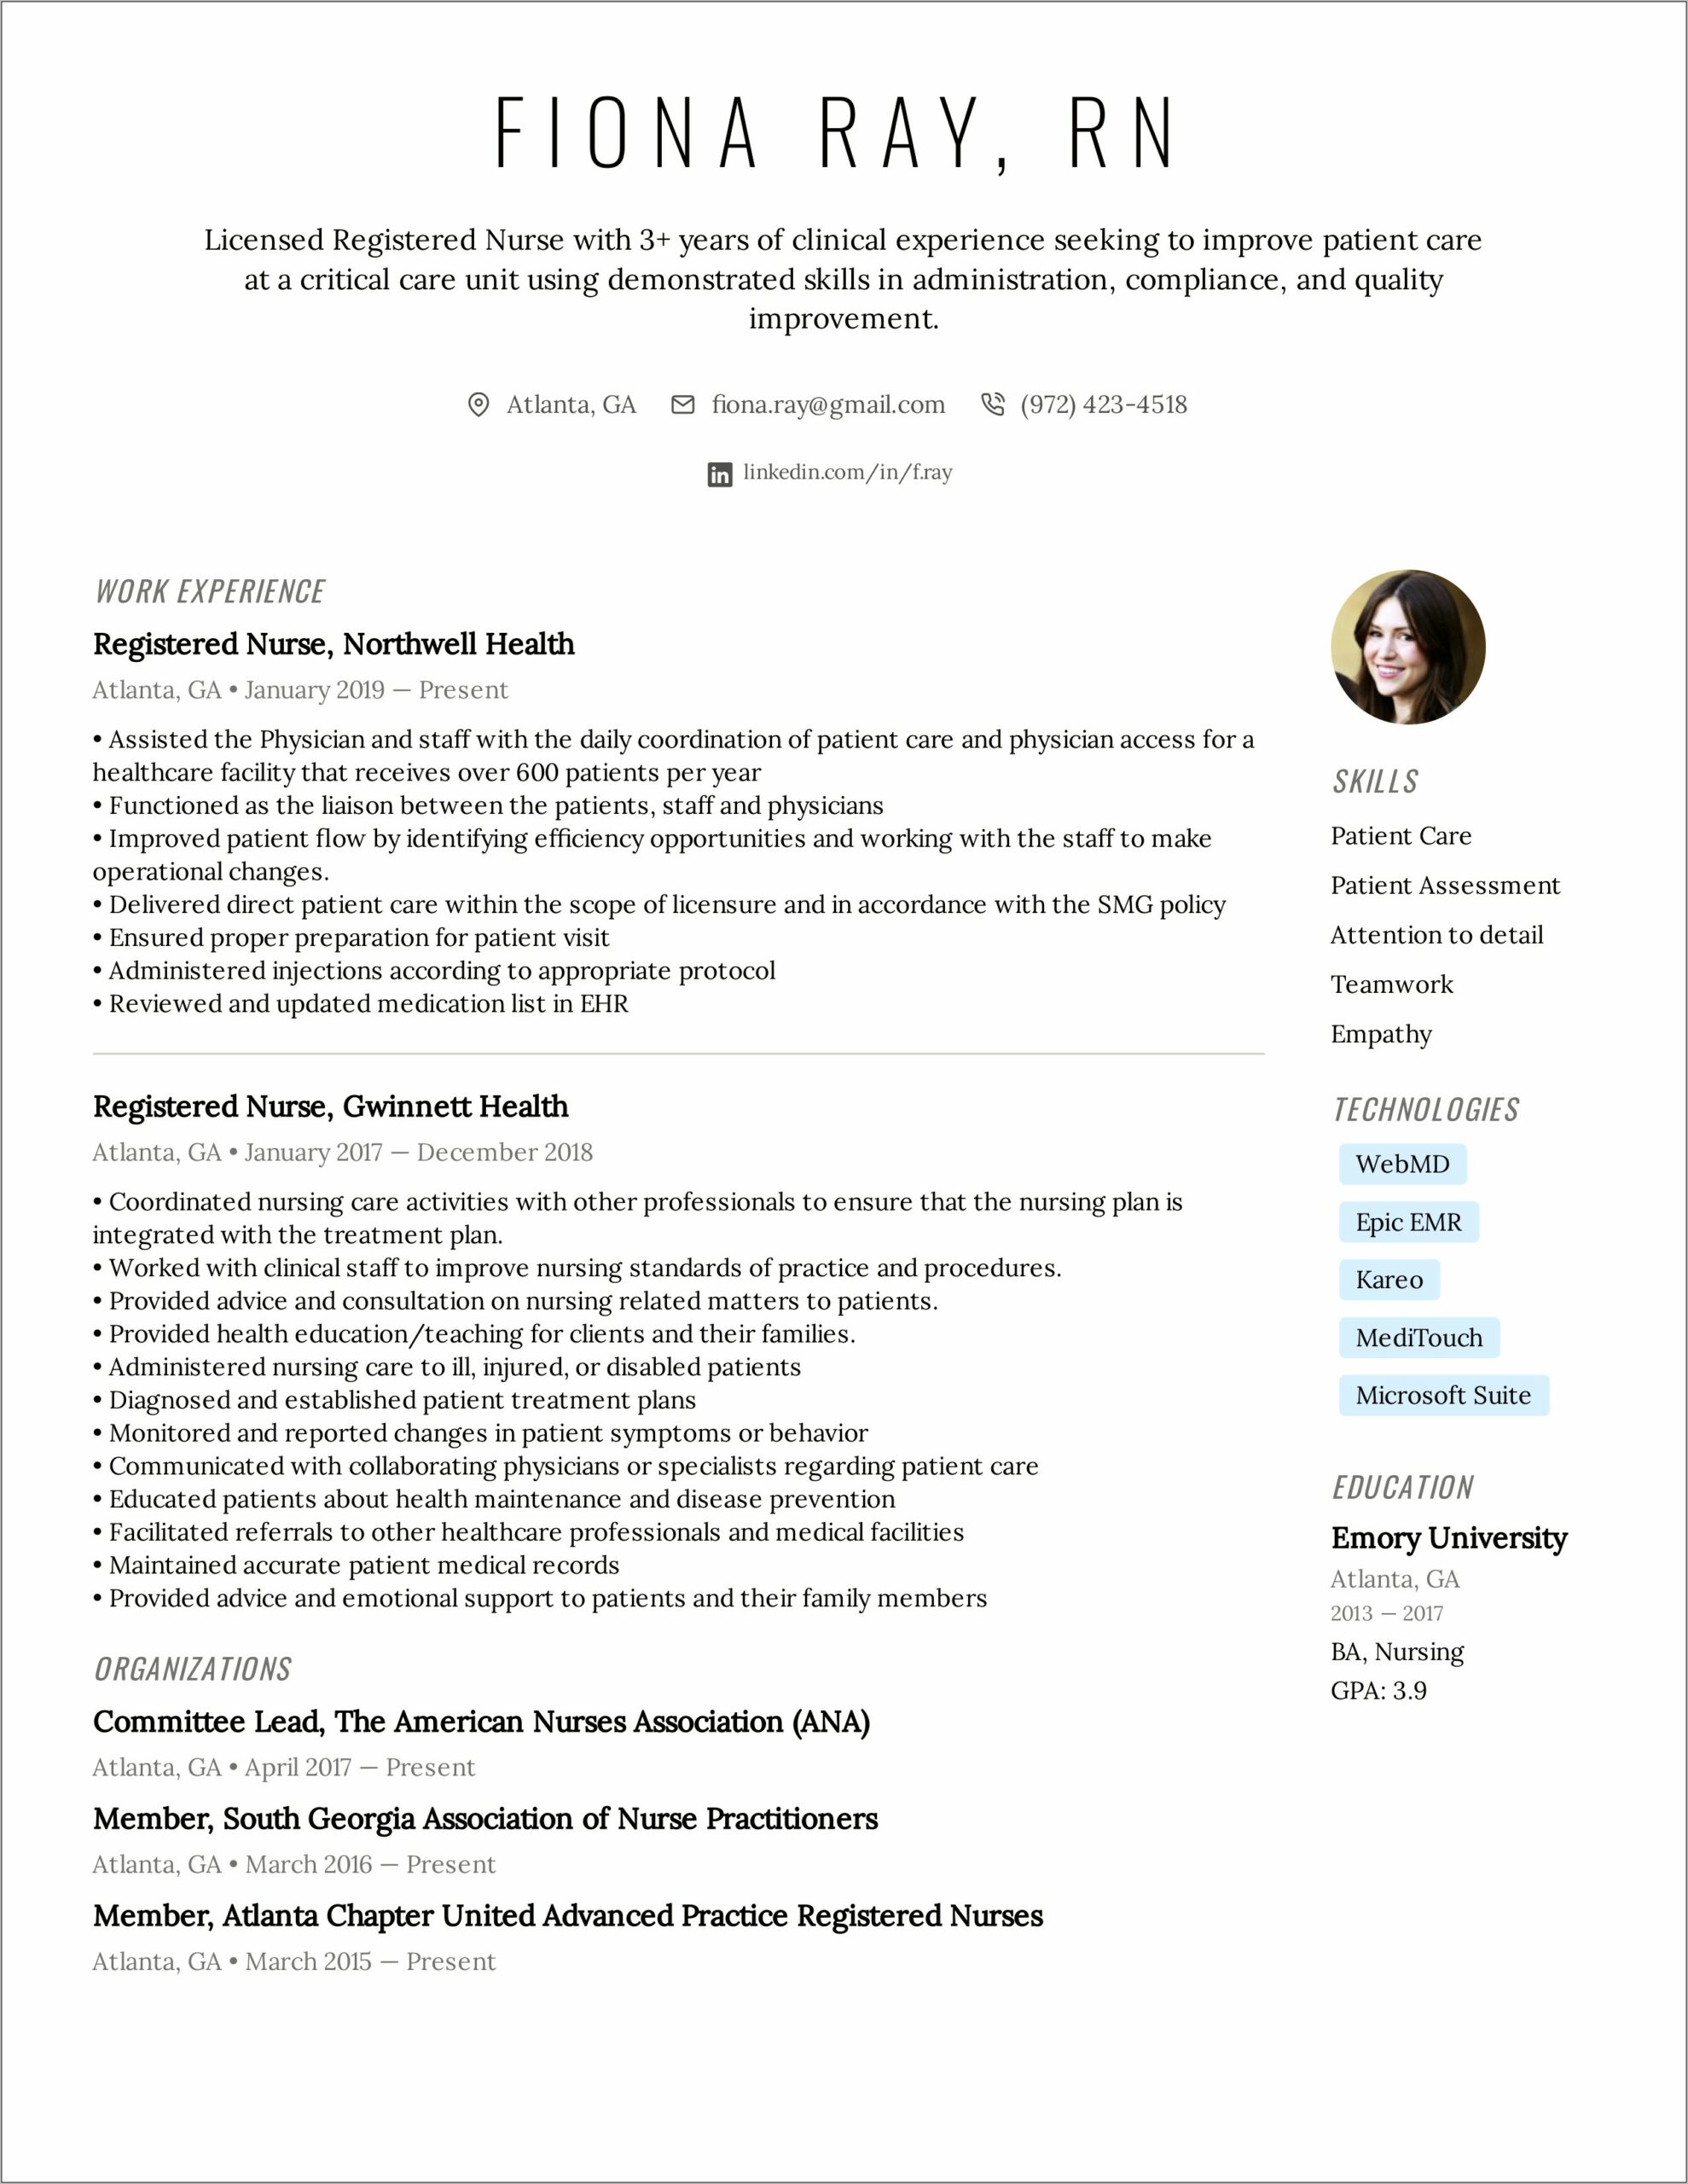 Sample Resume With Certification Logo